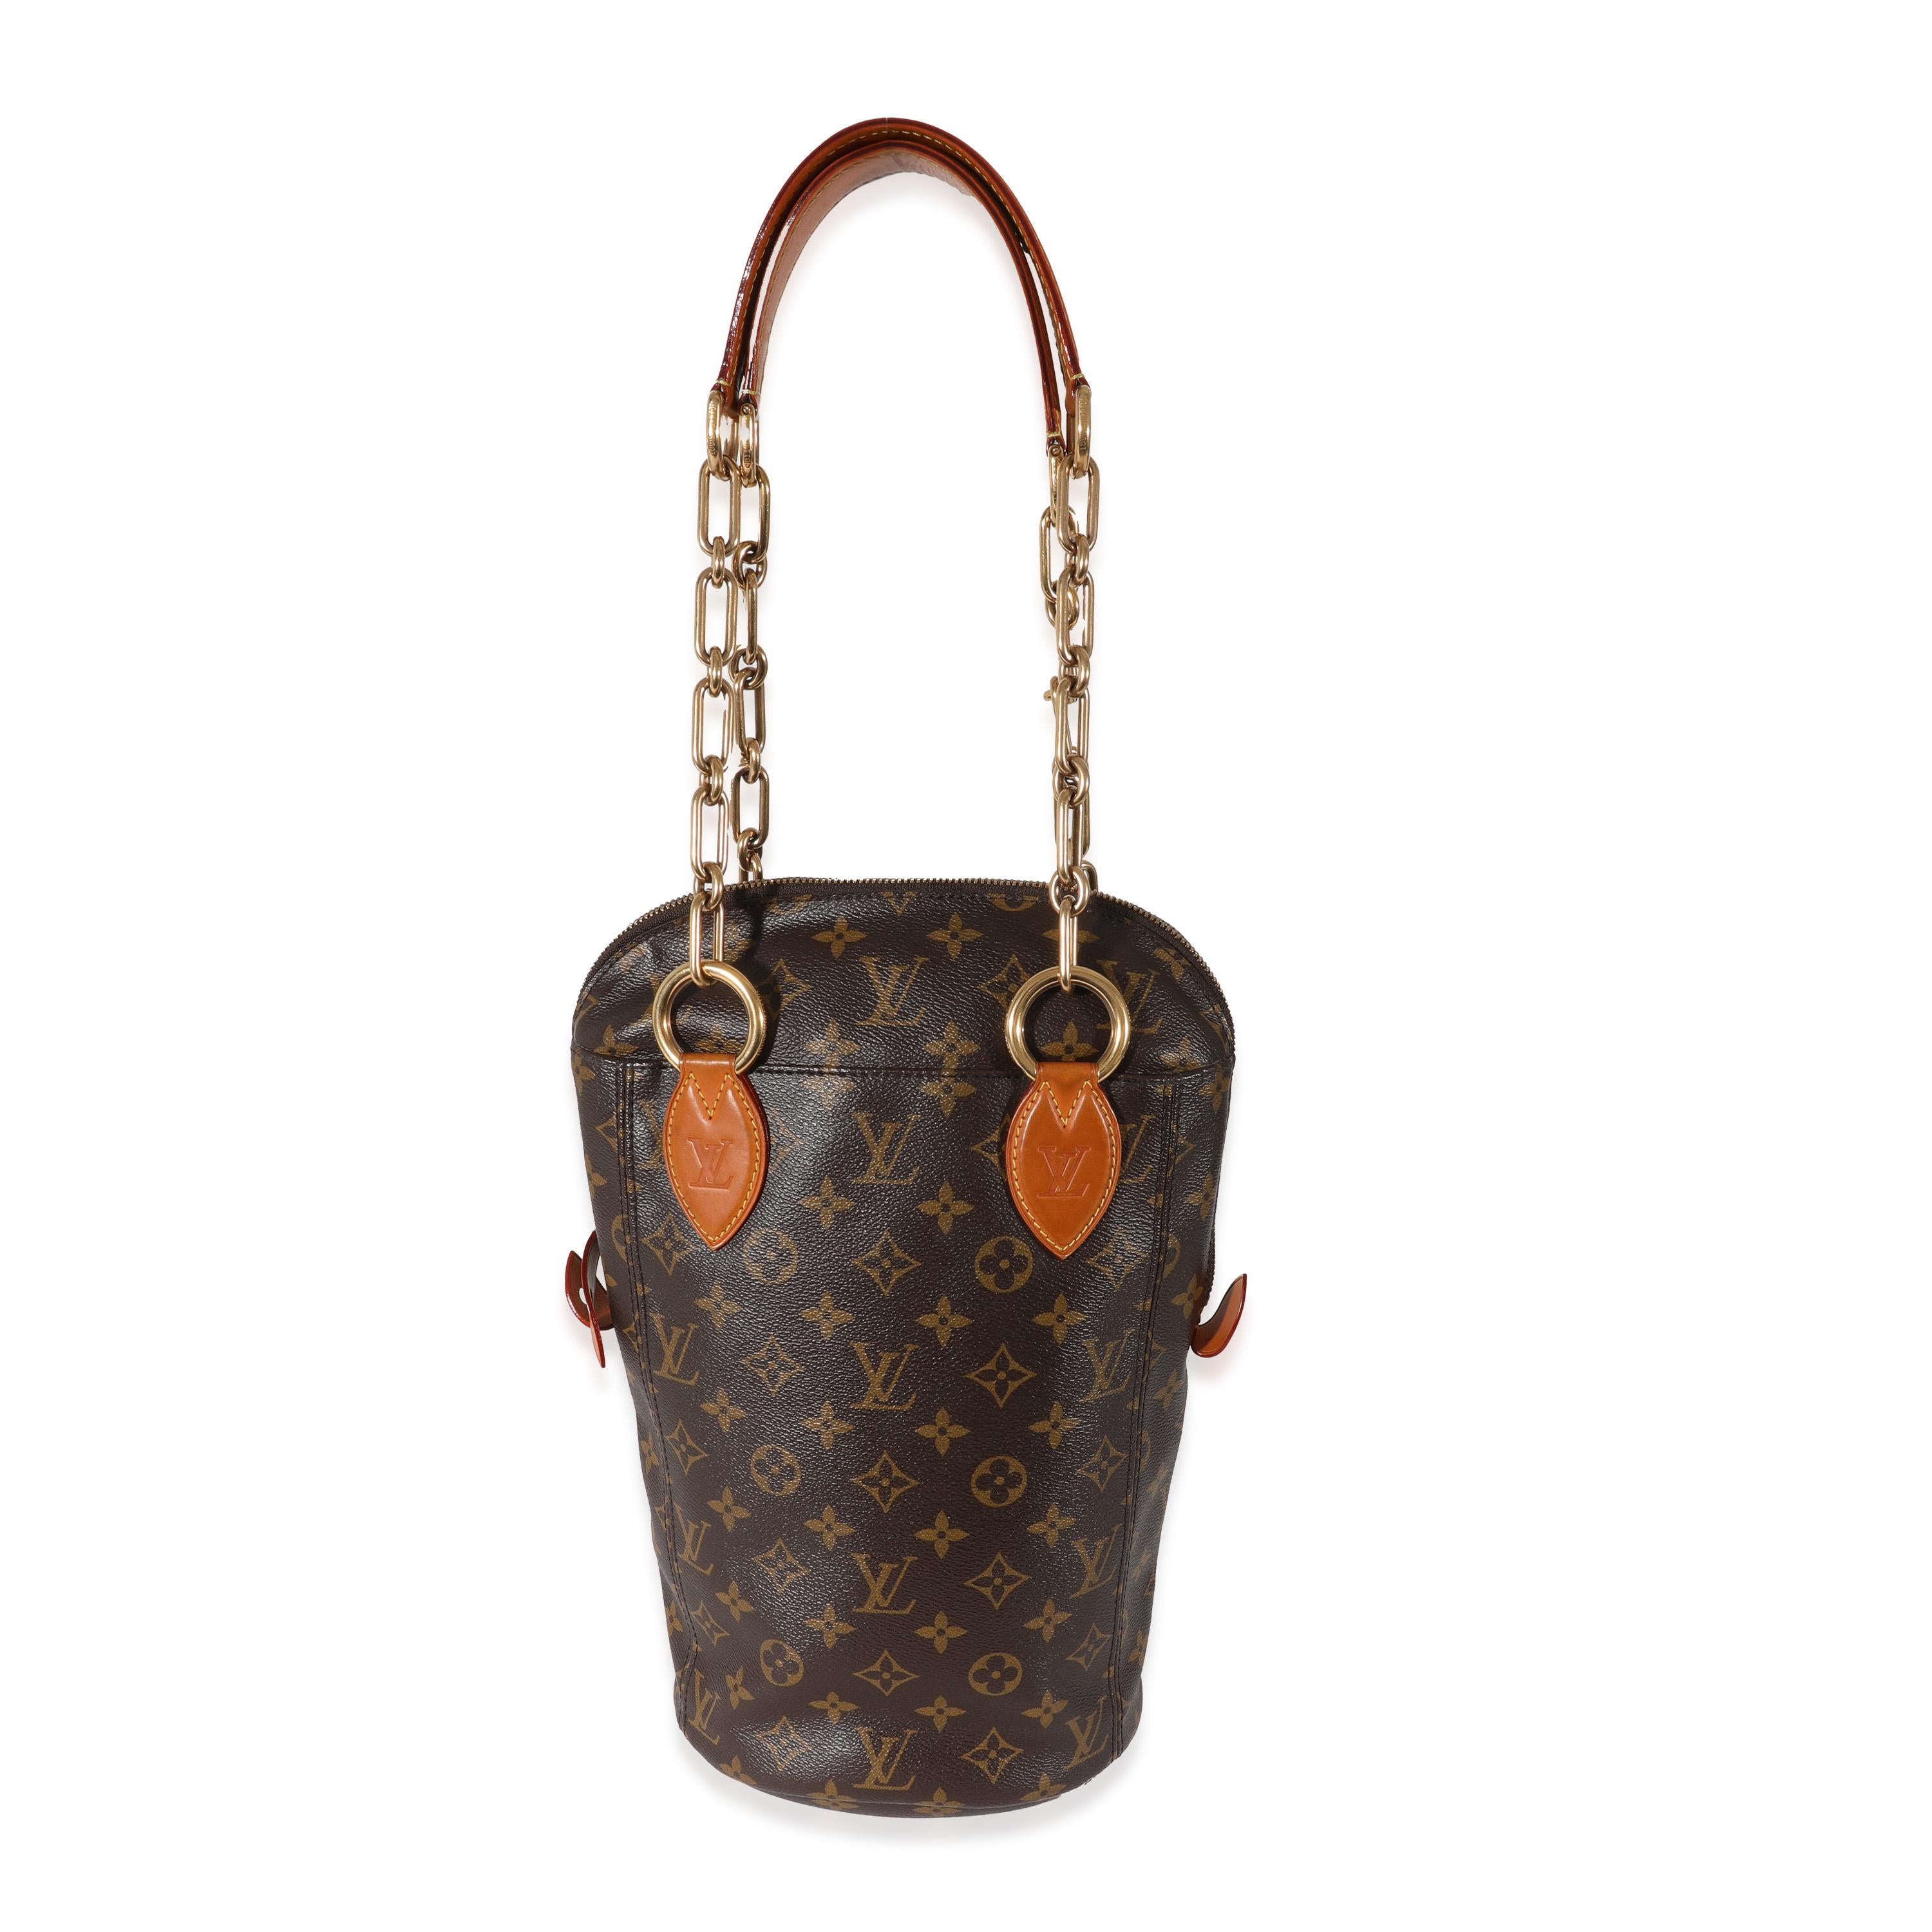 Listing Title: Louis Vuitton Monogram Canvas Iconoclasts Karl Lagerfeld Baby Punching Bag
SKU: 130240
Condition: Pre-owned 
Handbag Condition: Very Good
Condition Comments: Item is in very good condition with minor signs of wear. Heavy patina at